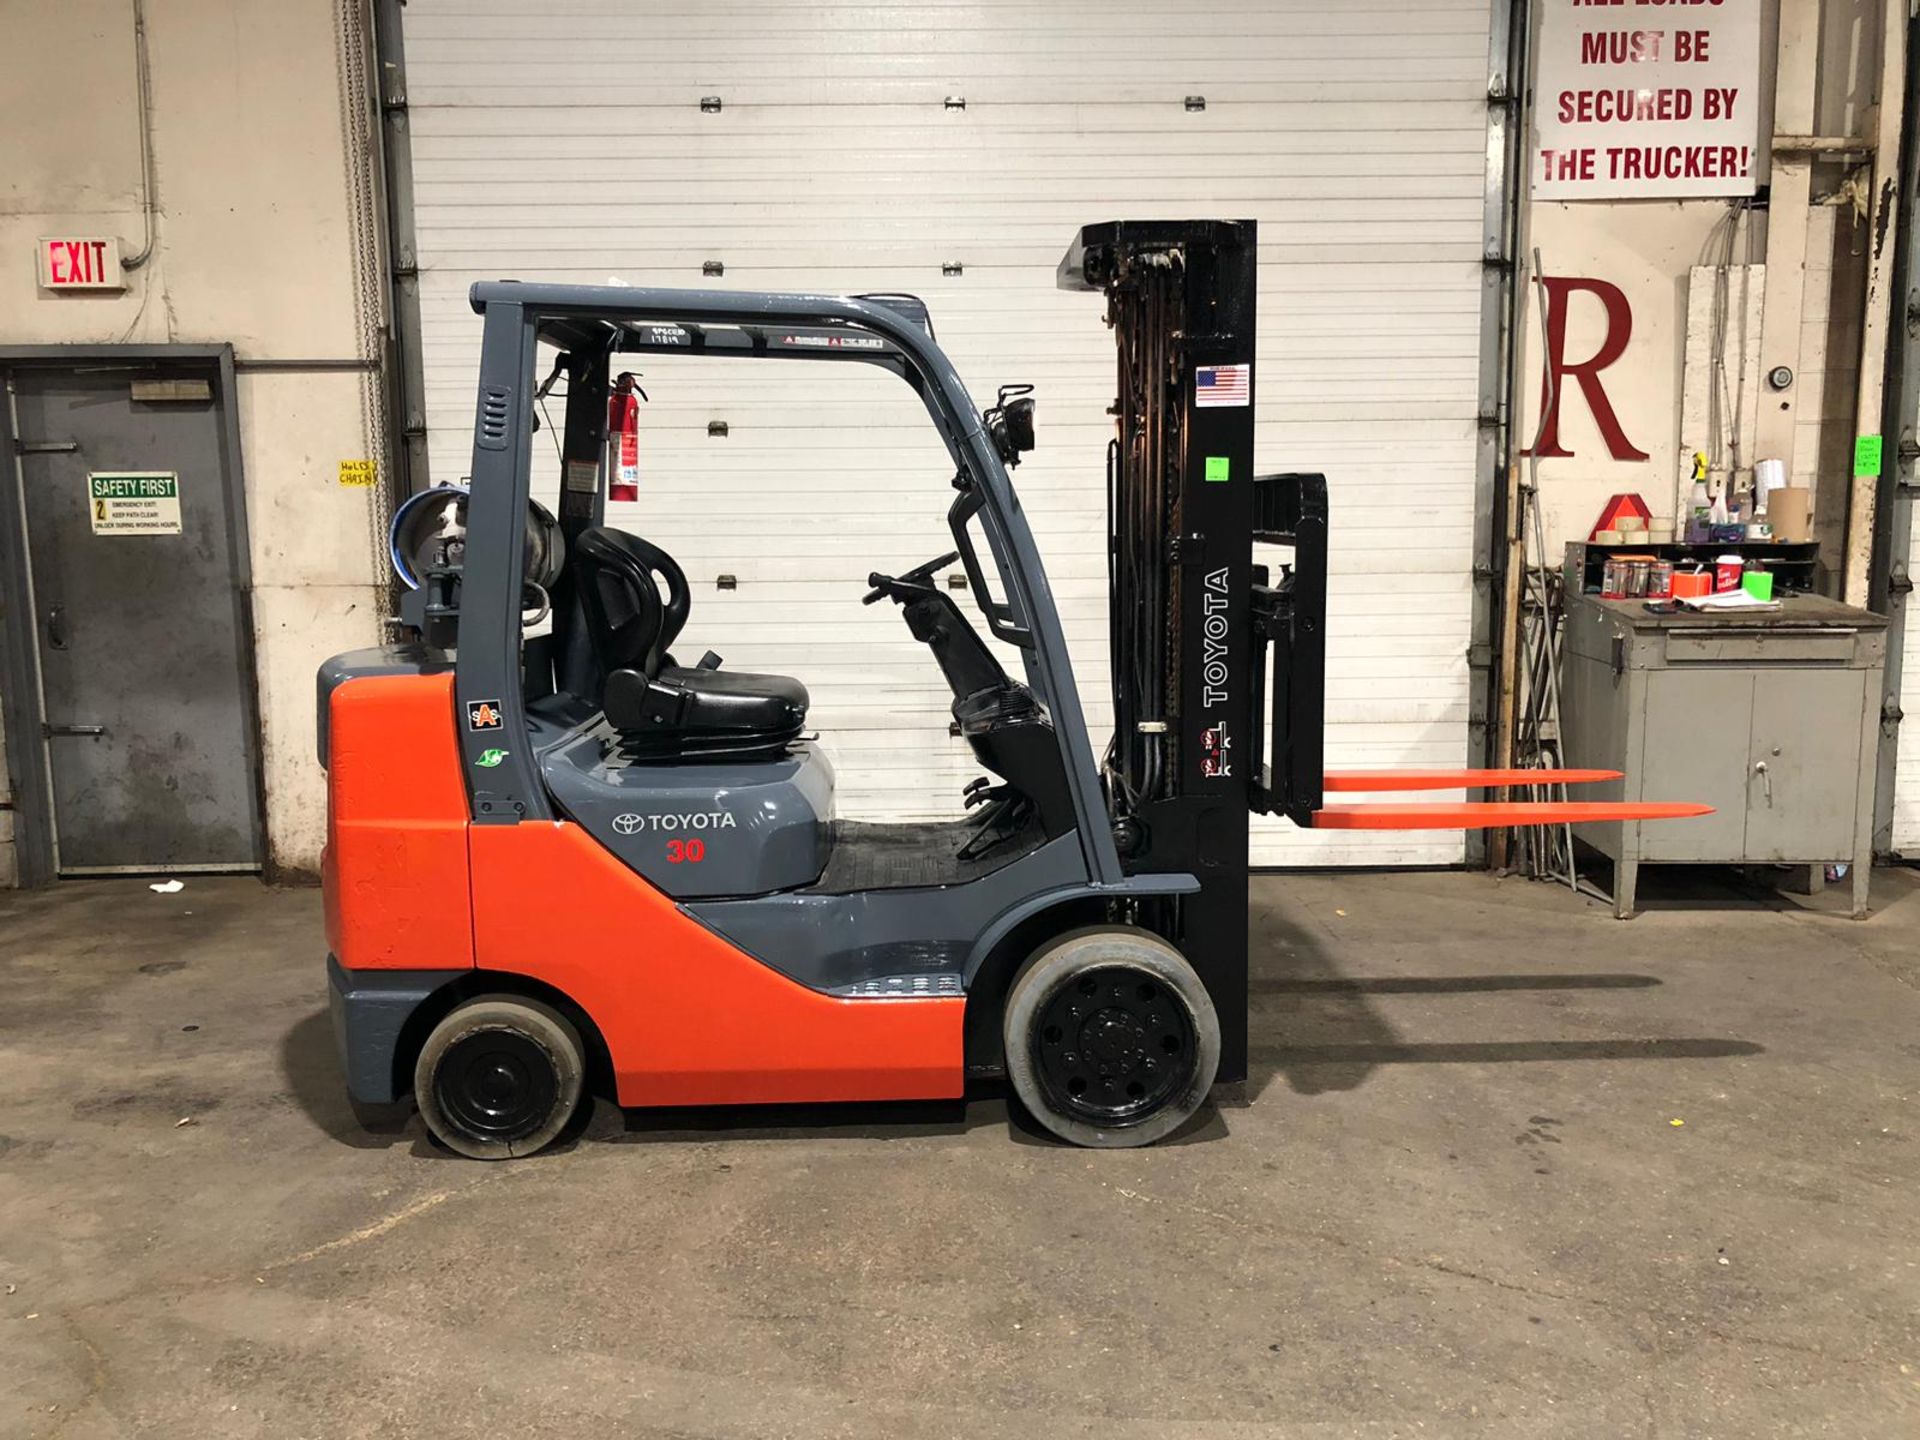 2012 Toyota 6,000lbs Capacity LPG (Propane) Forklift with sideshift and 3-STAGE MAST (no propane